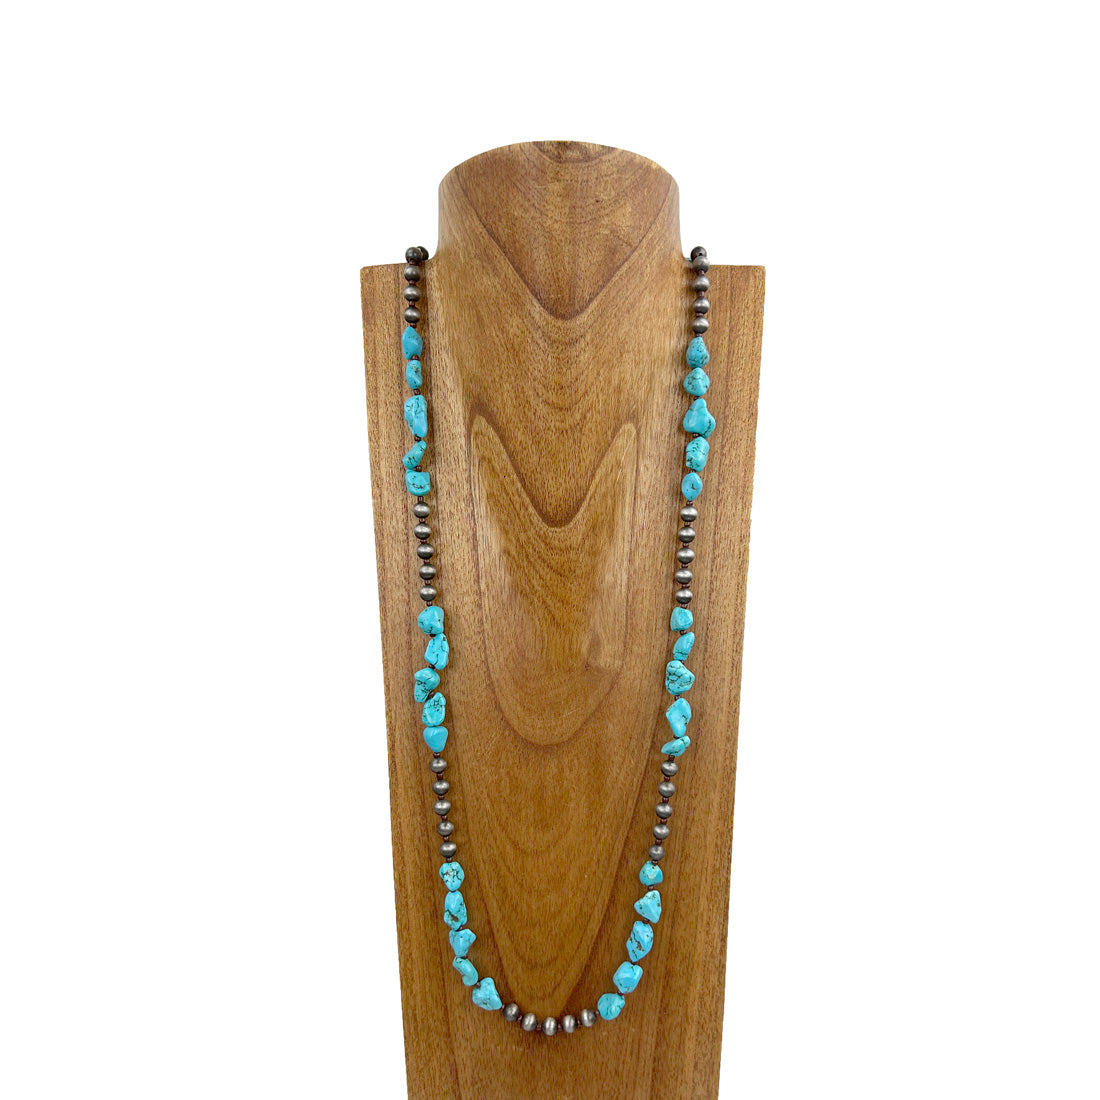 NKZ230930-06                40 inches blue turquoise stone with silver Navajo pearl beads Necklace